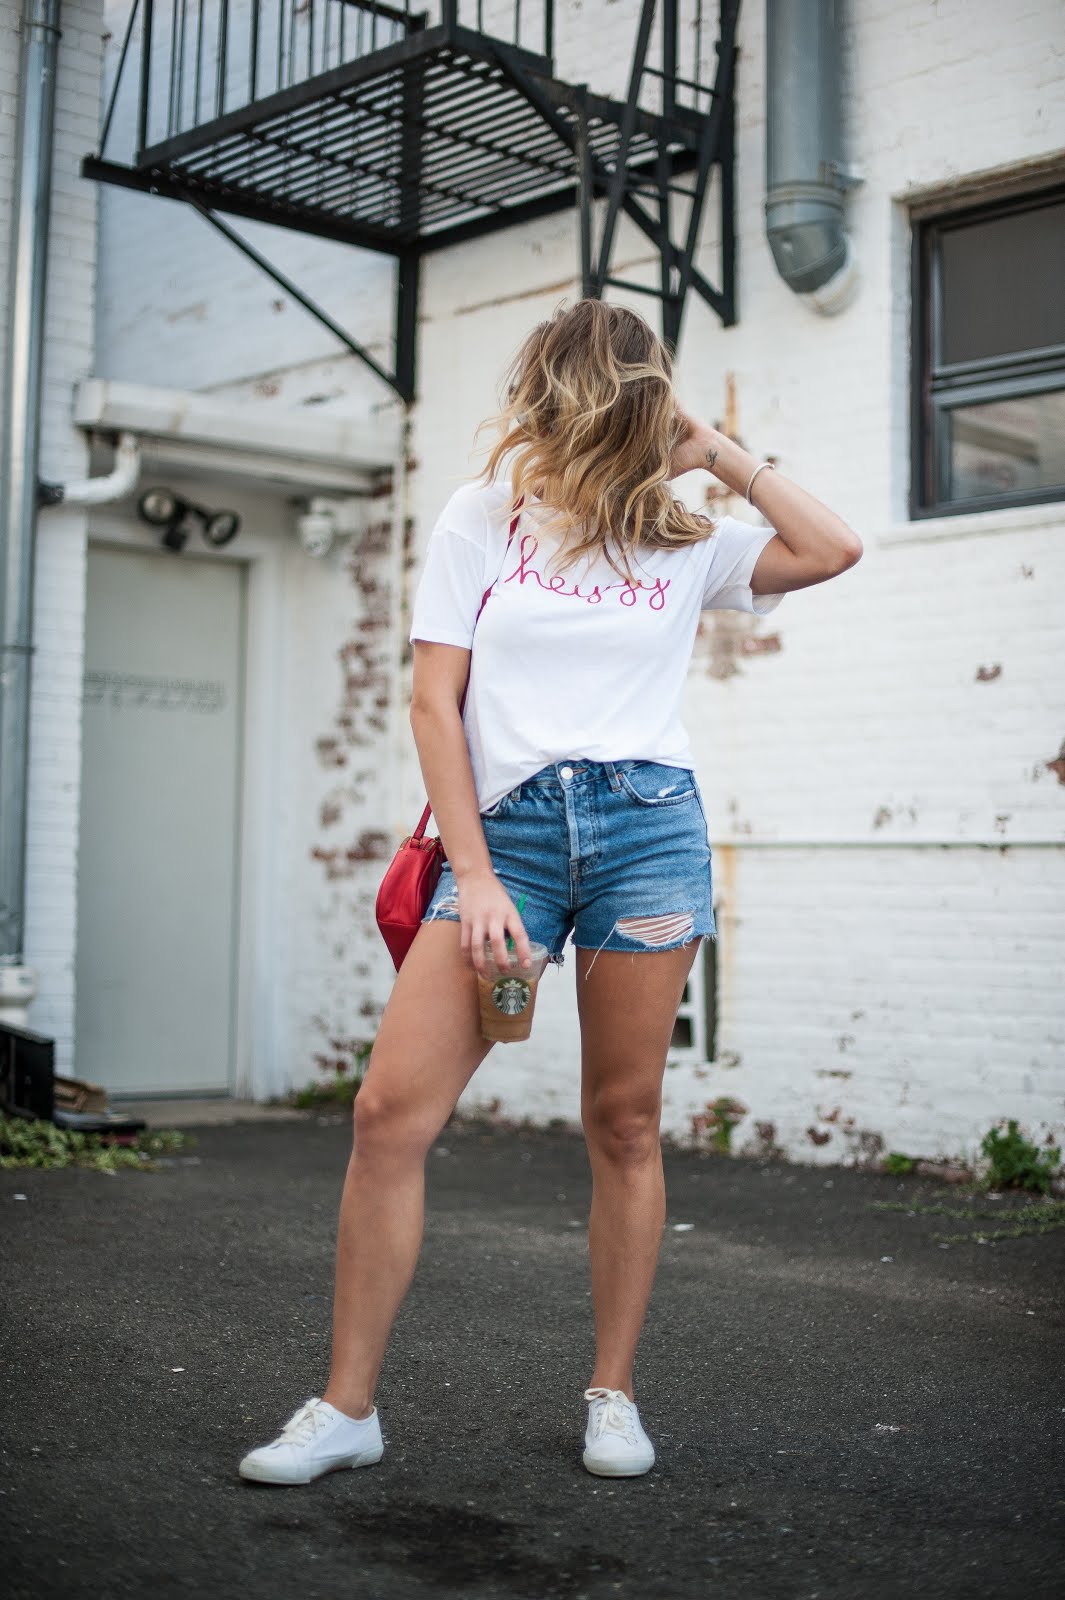 Her Name Is Sylvia: rocking a graphic tee